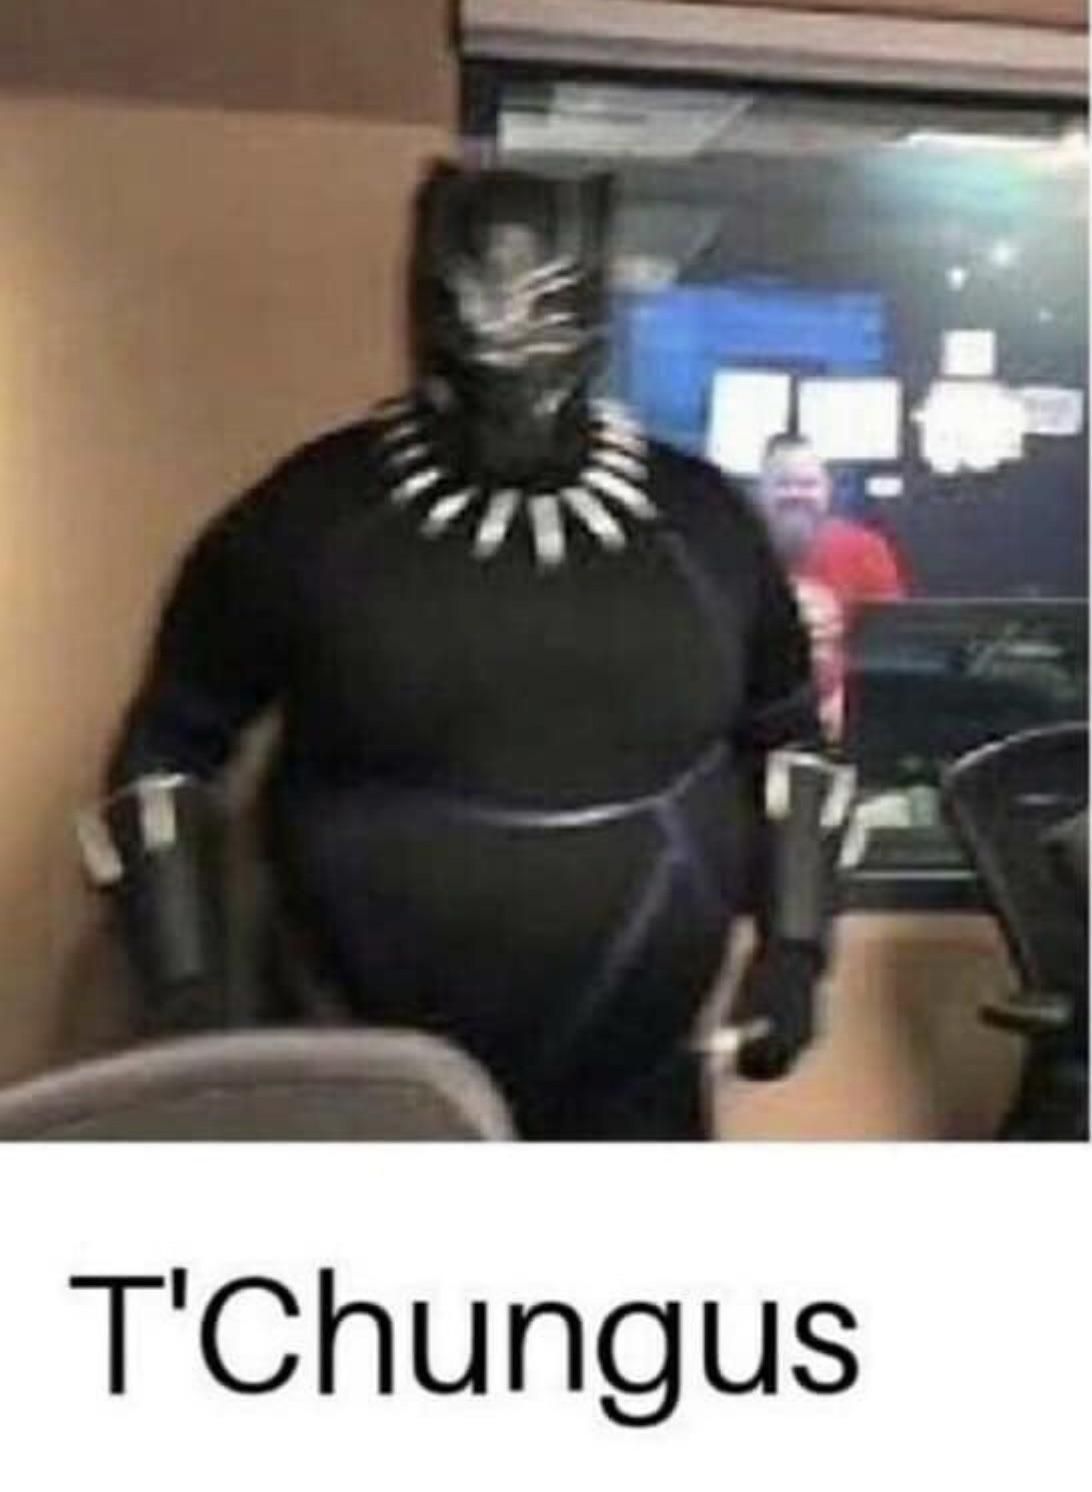 T’challa is that you